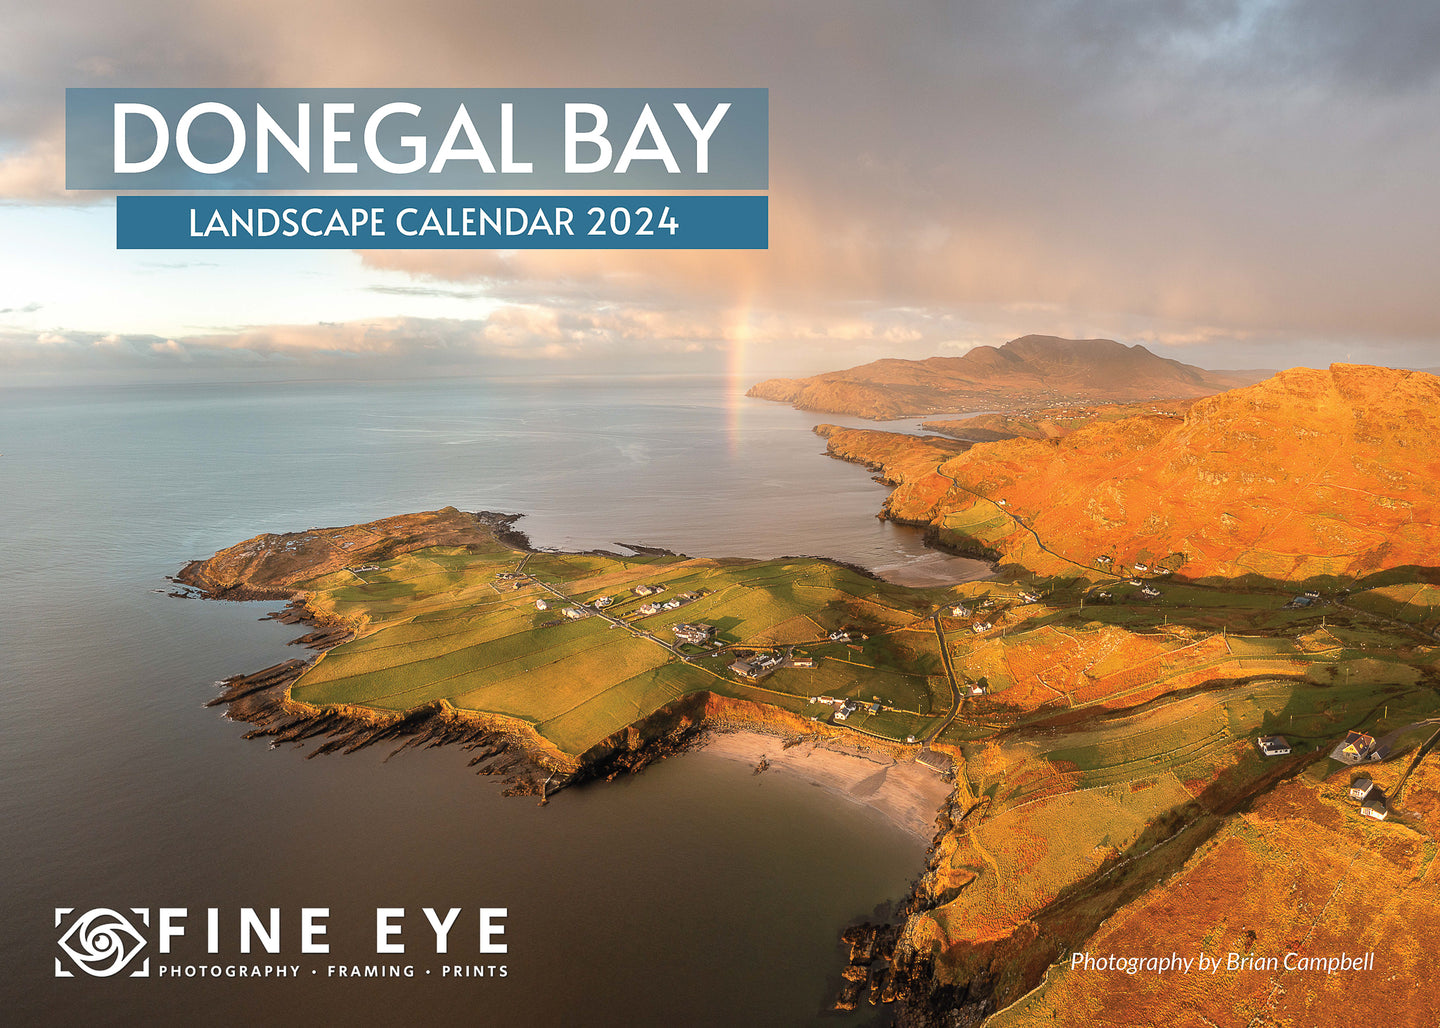 Donegal Bay 'Limited Edition' Calendar 2024